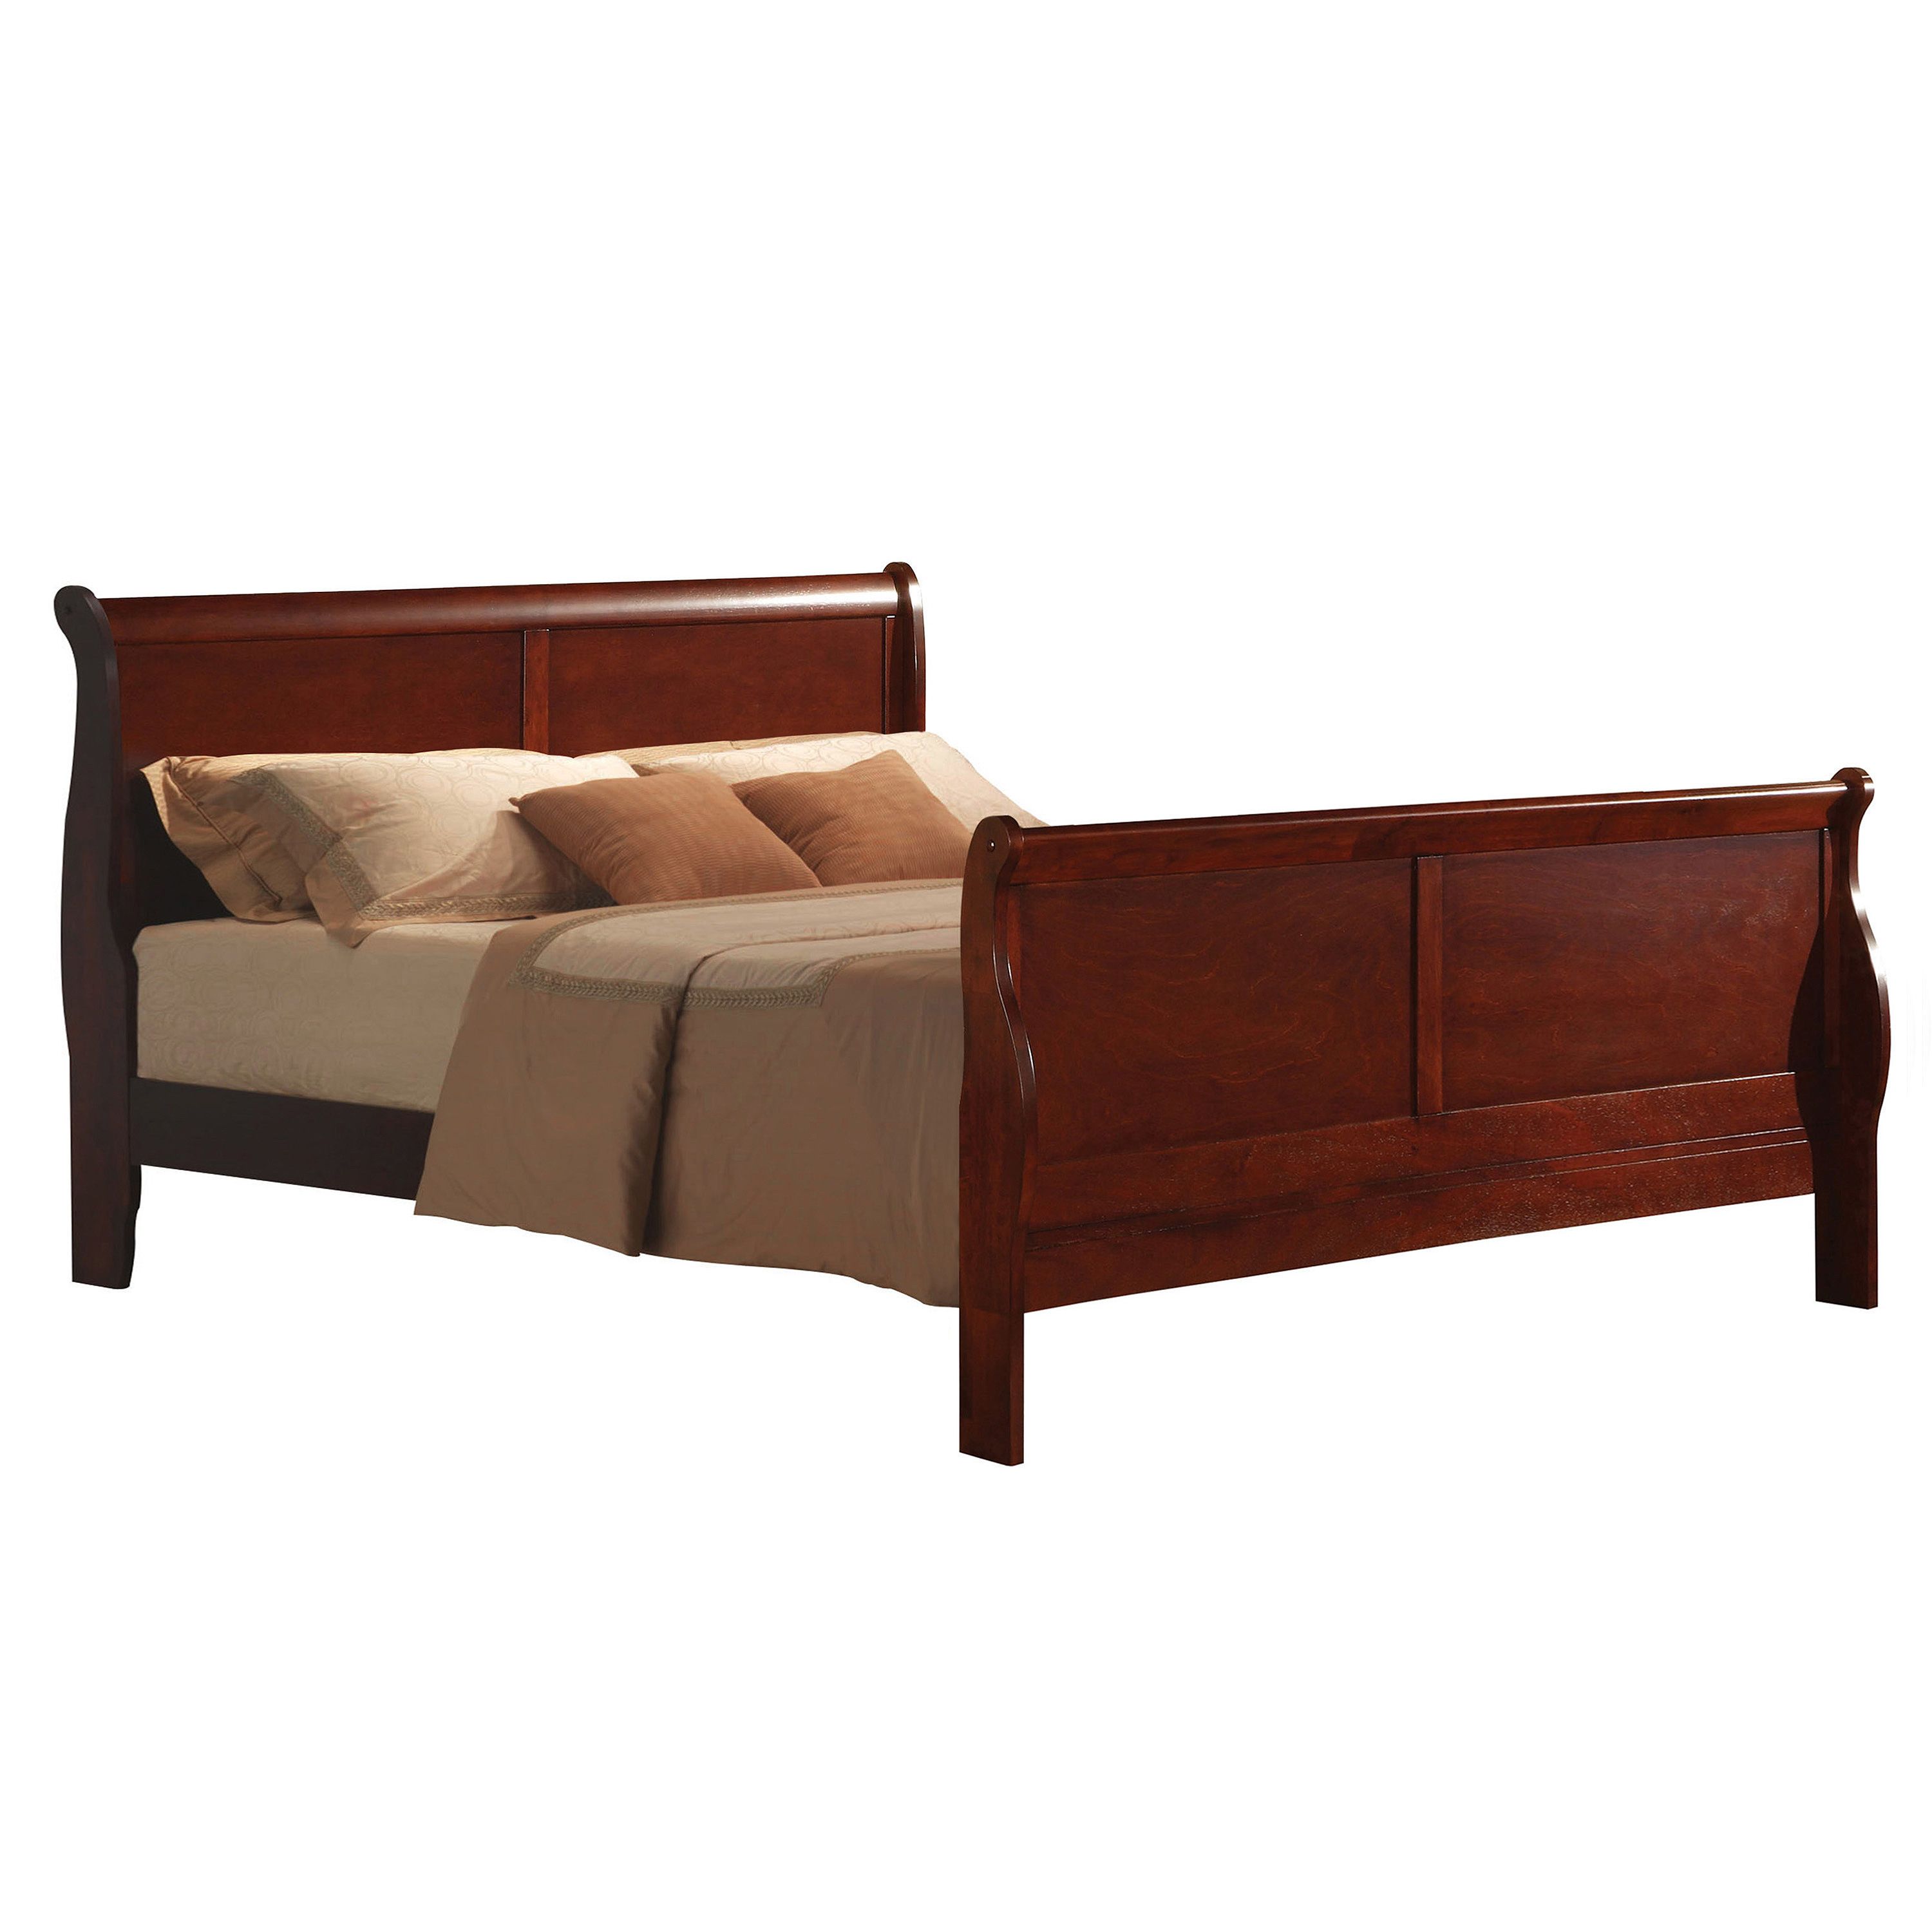 ACME Louis Philippe III California King Bed in Cherry 19514CK - image 2 of 2